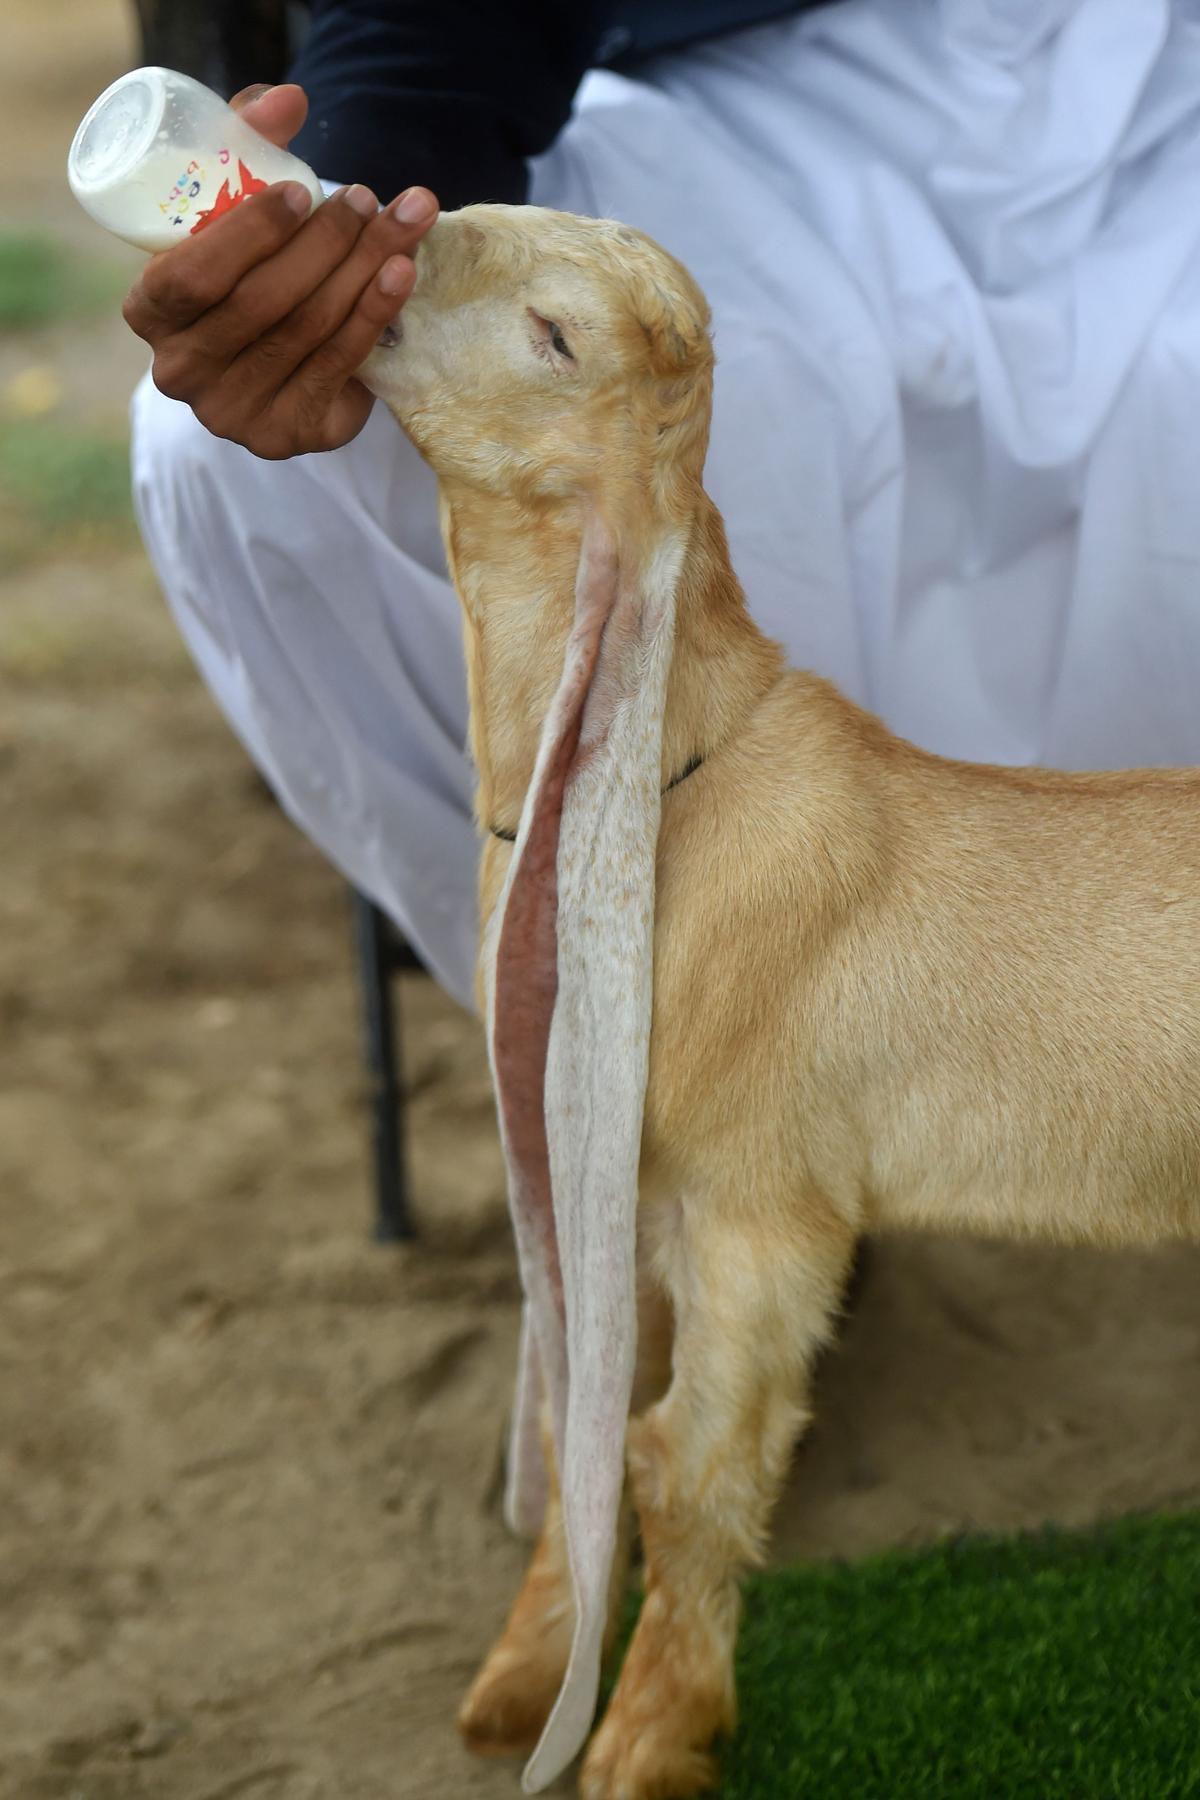 Hassan Narejo feeds milk to his kid goat Simba, in Karachi on July 6, 2022. (Asif Hassan/AFP via Getty Images)